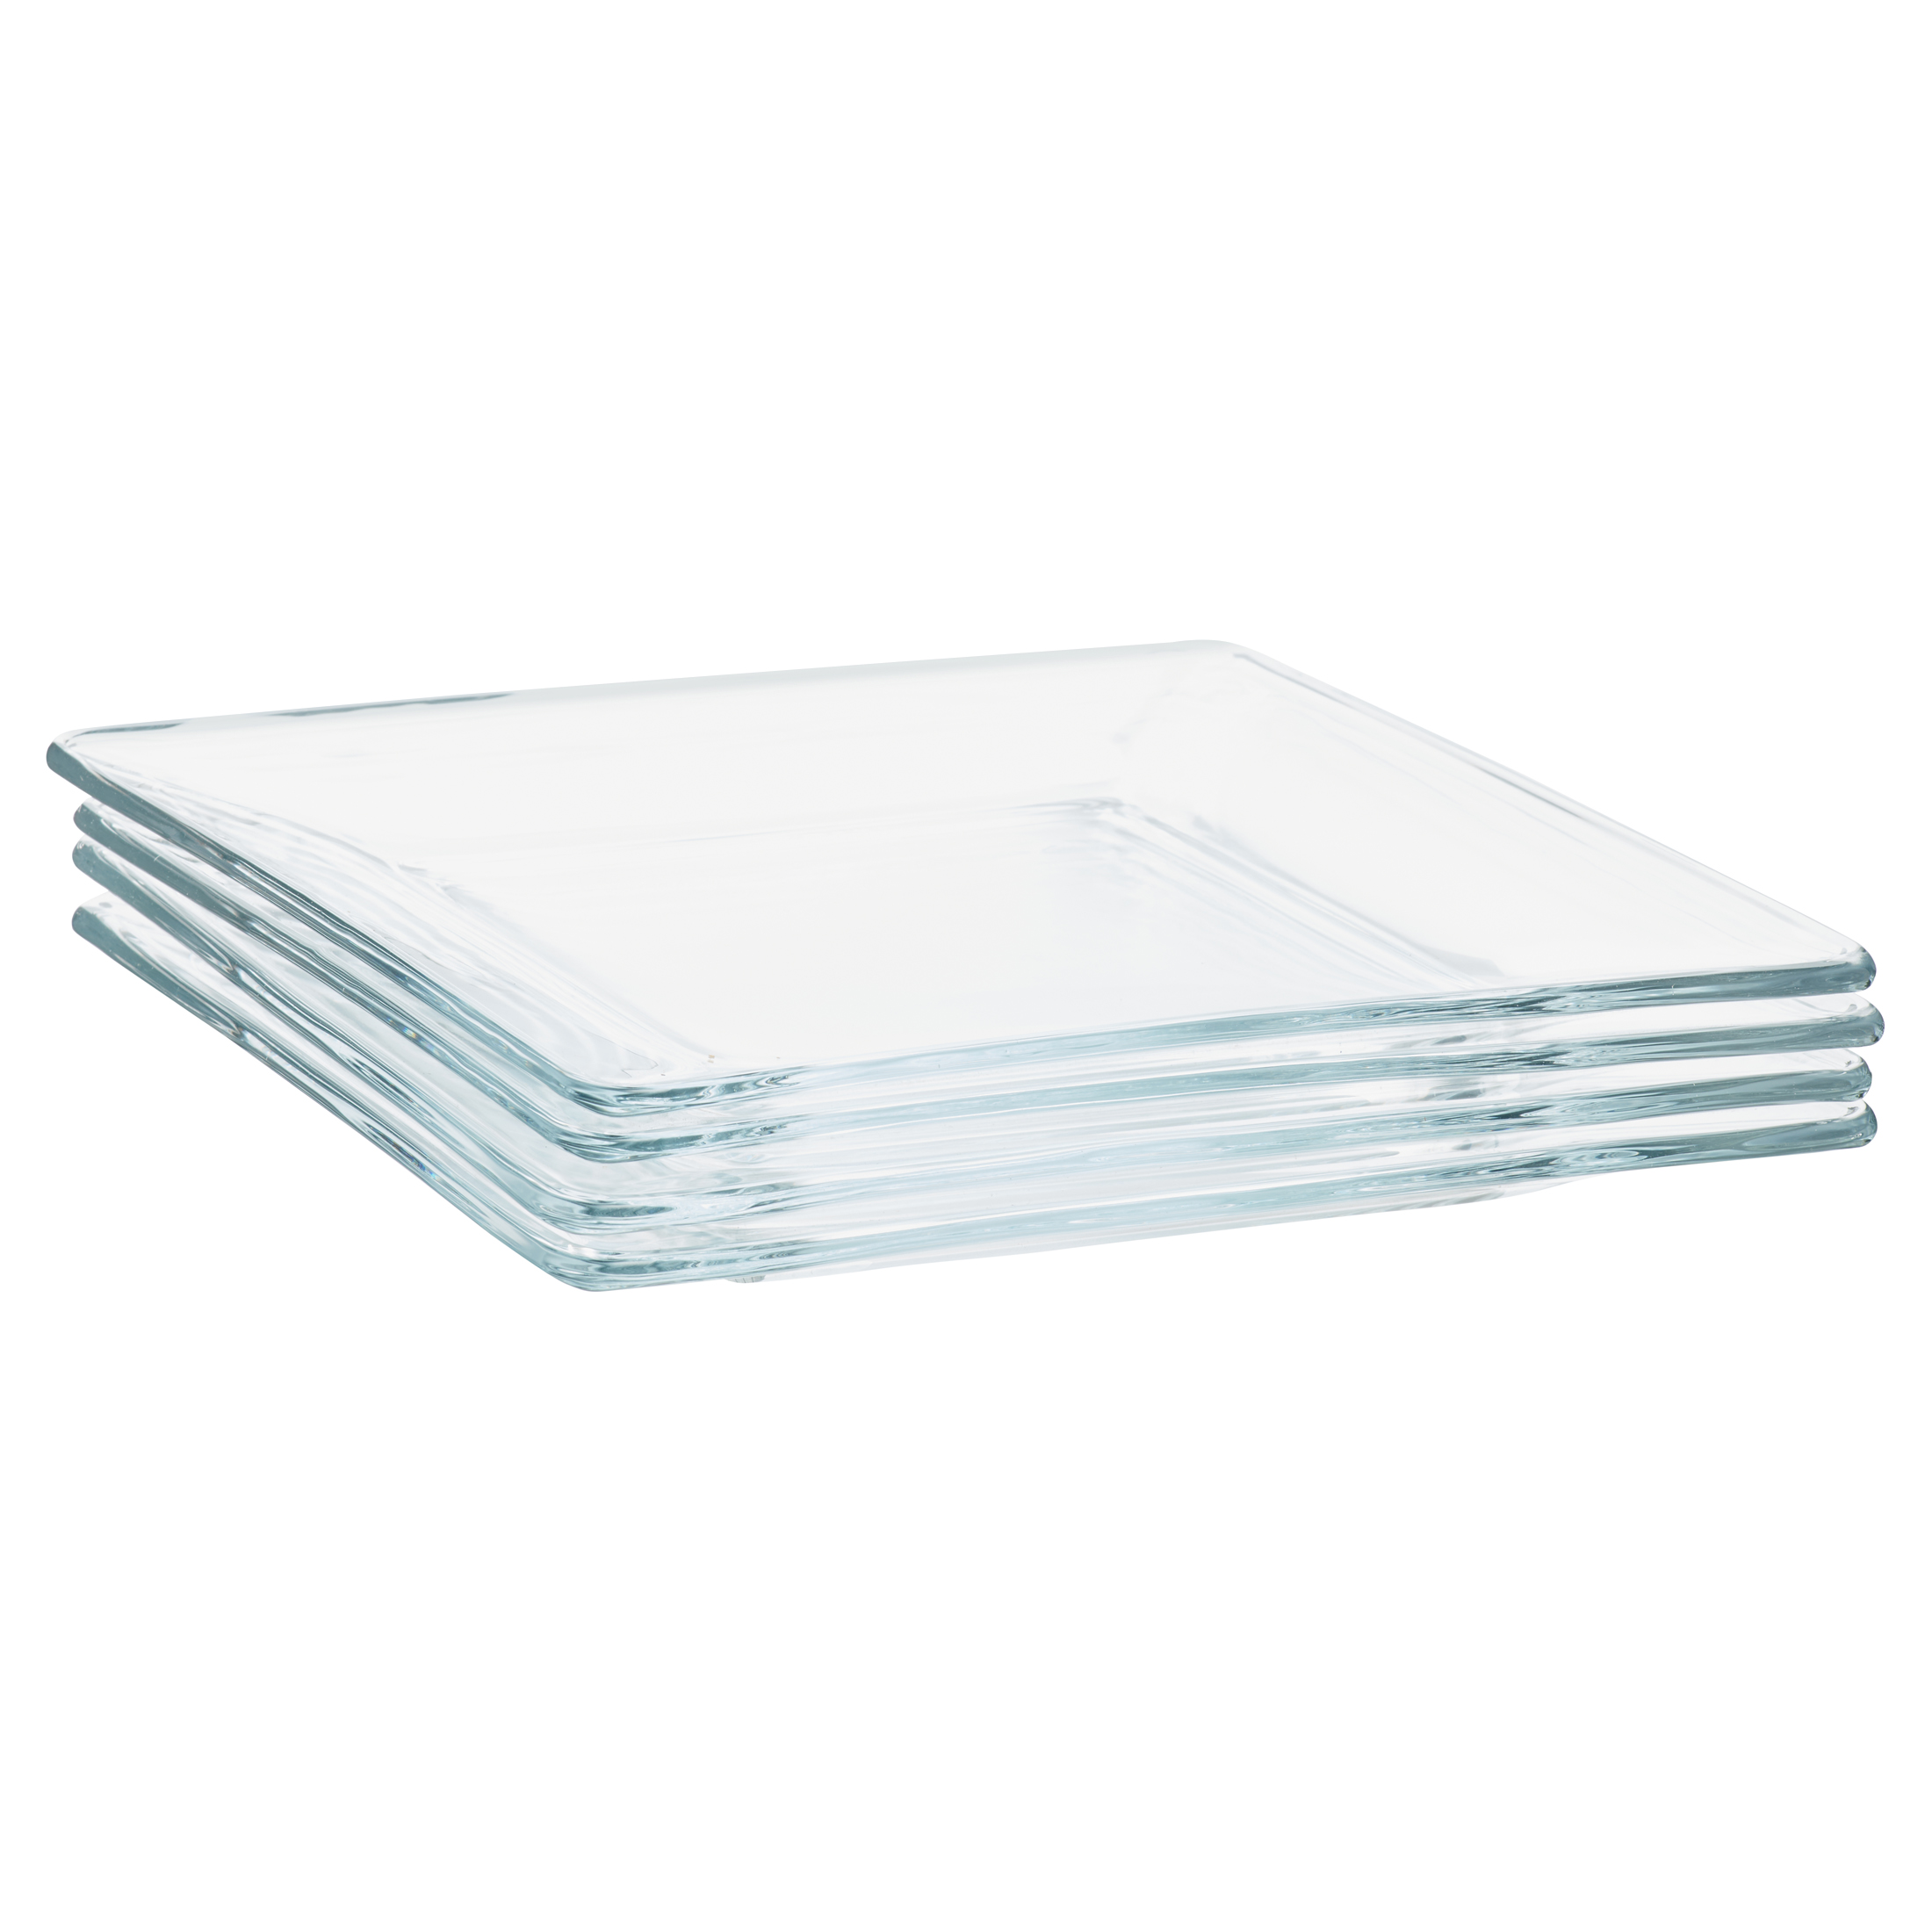 Mainstays 12-Piece Square Clear Glass Dinnerware Set - image 4 of 13